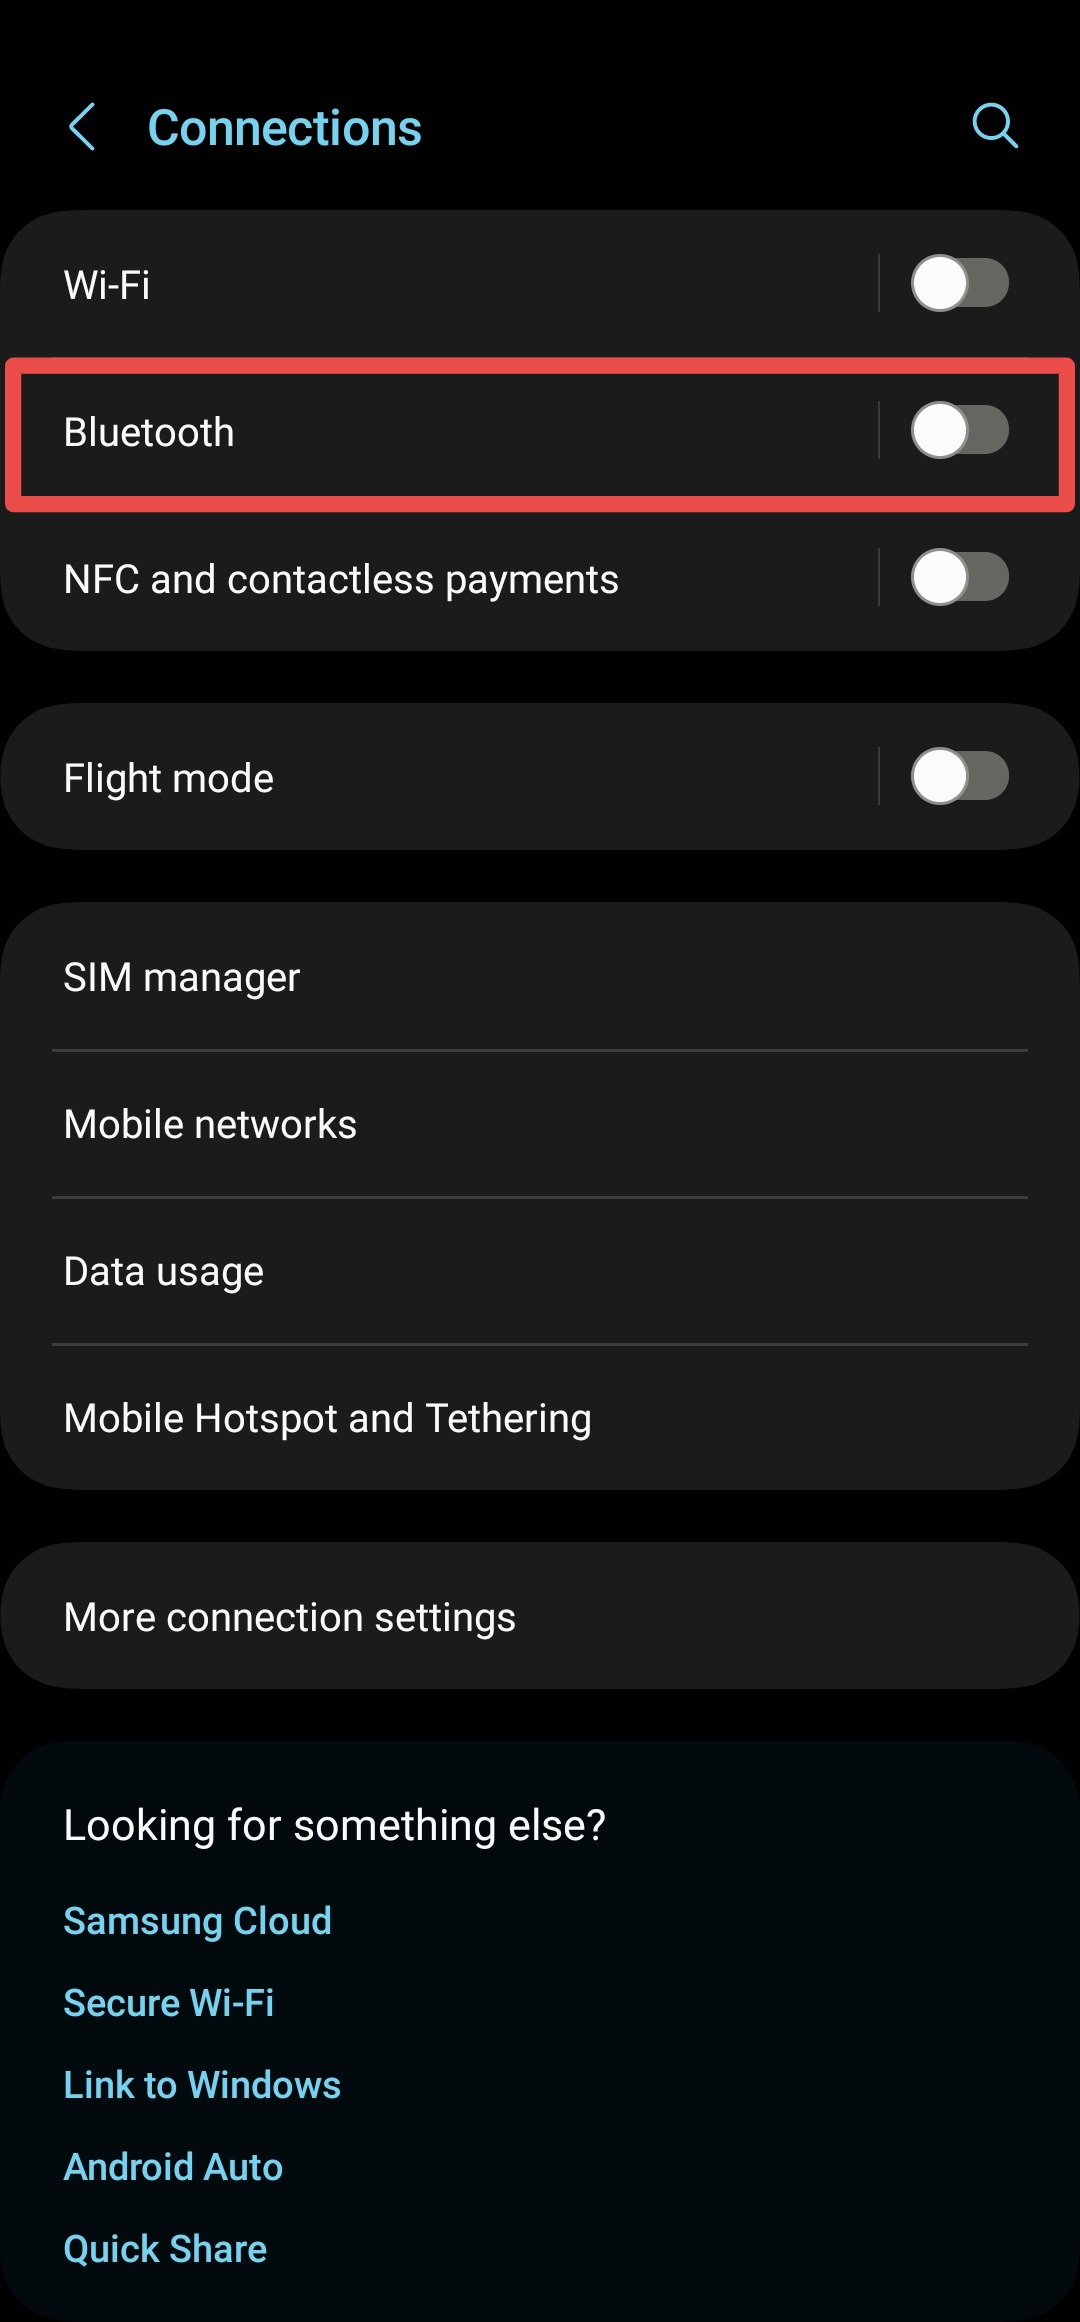 Samsung Connection settings